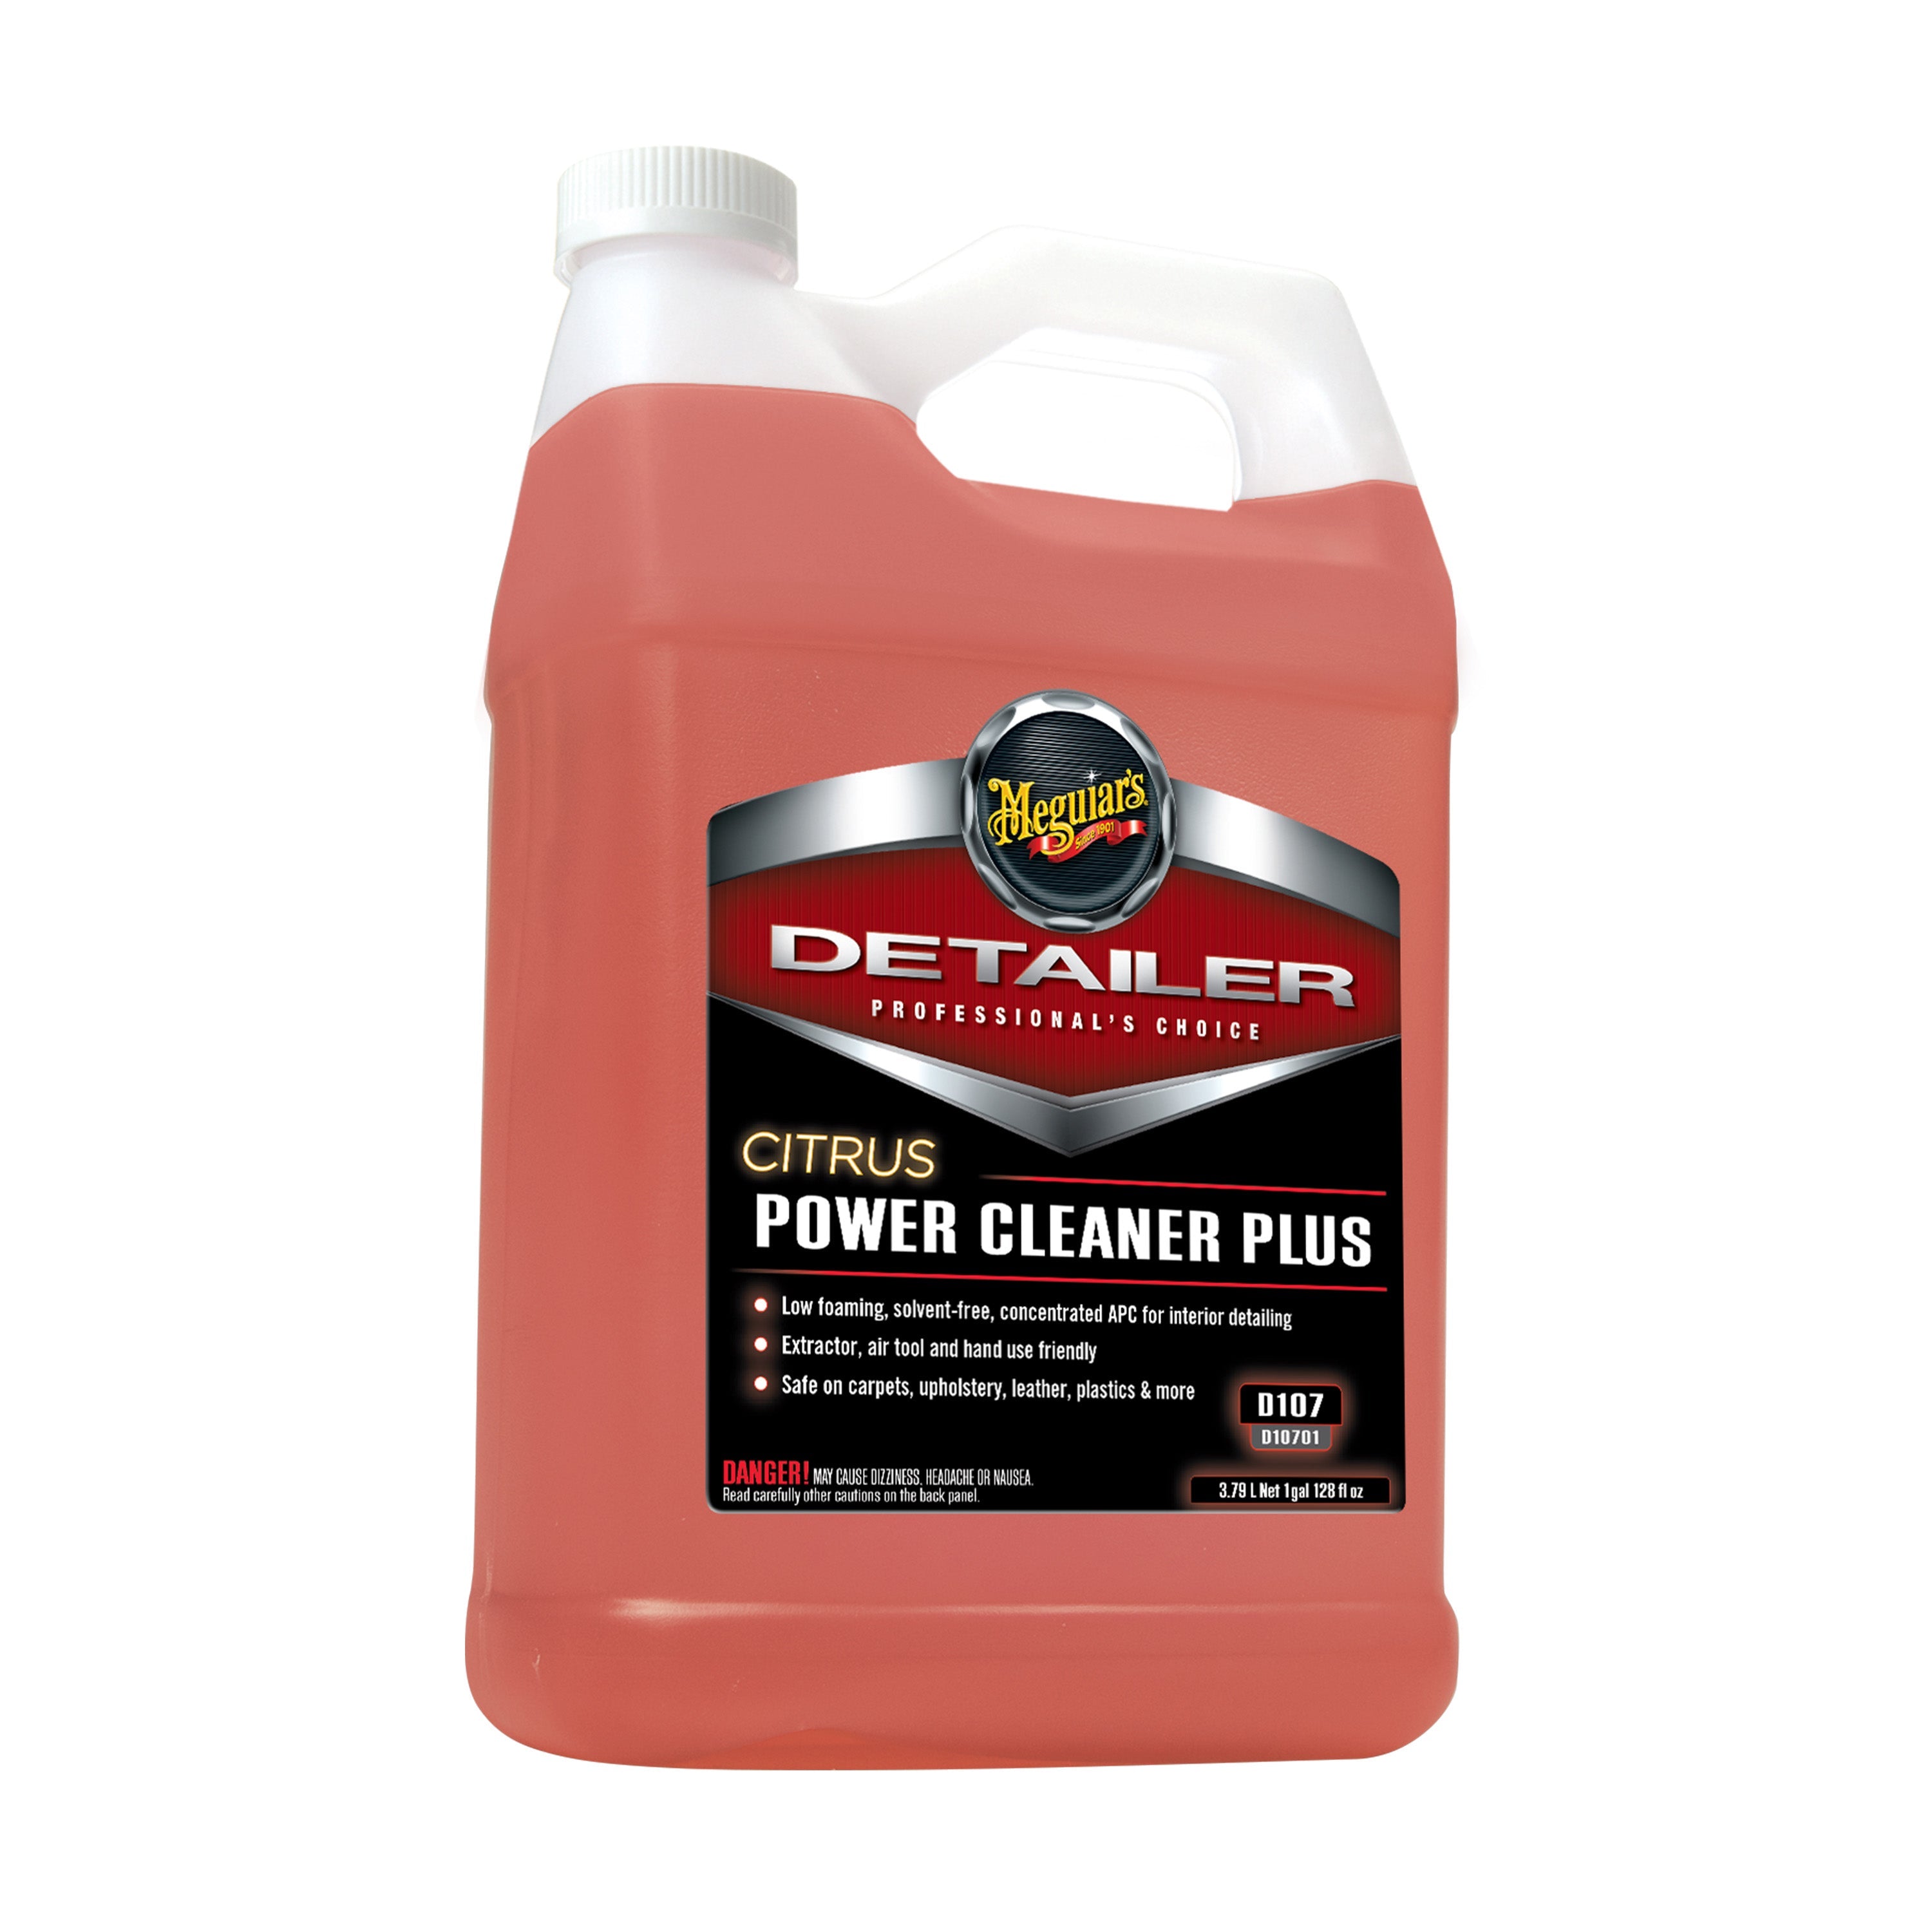 MEGUIARS All Purpose Cleaner - Cleaner